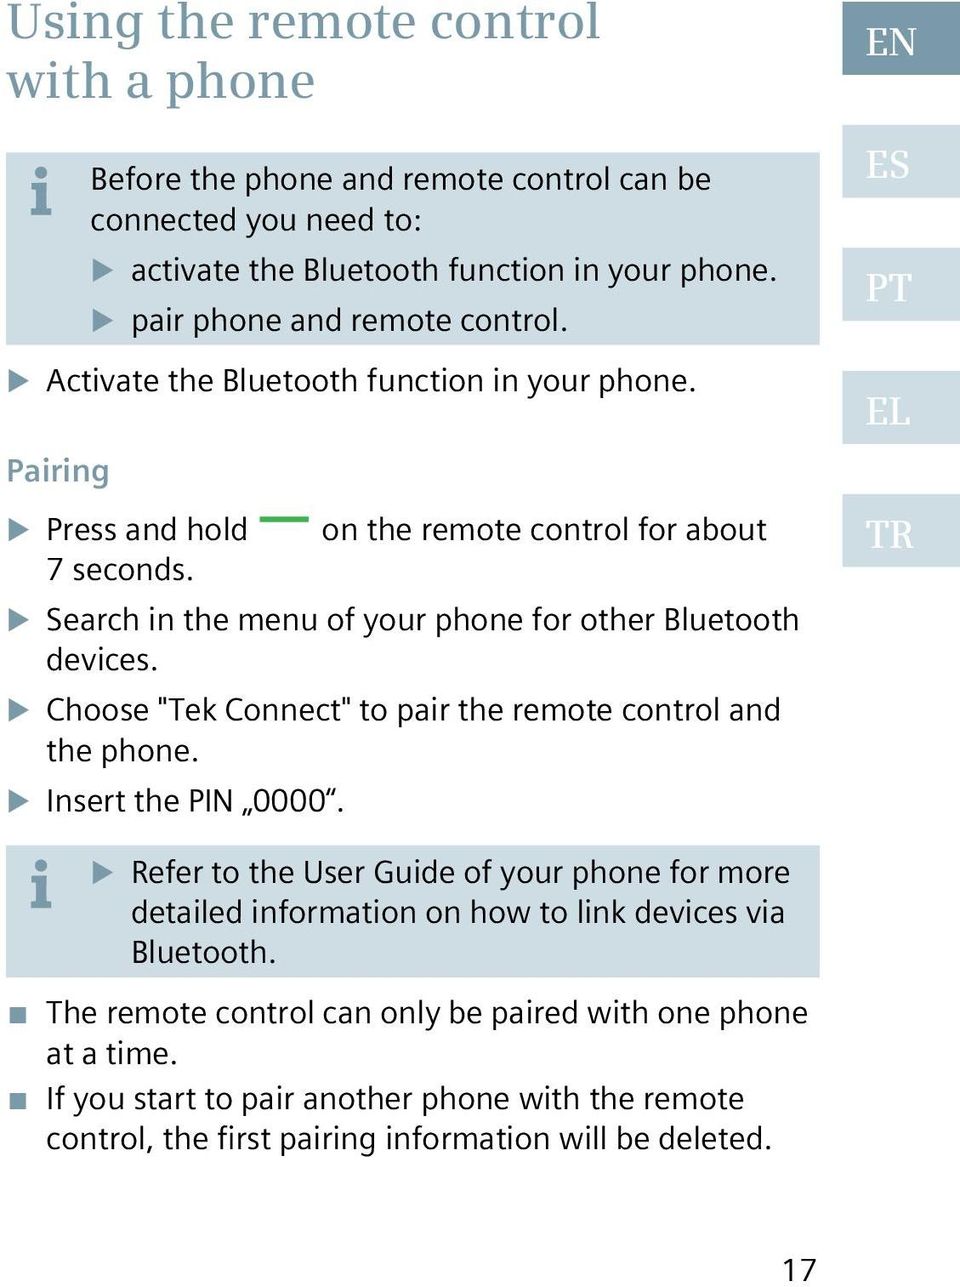 Choose "Tek Connect" to pair the remote control and the phone. Insert the PIN 0000.